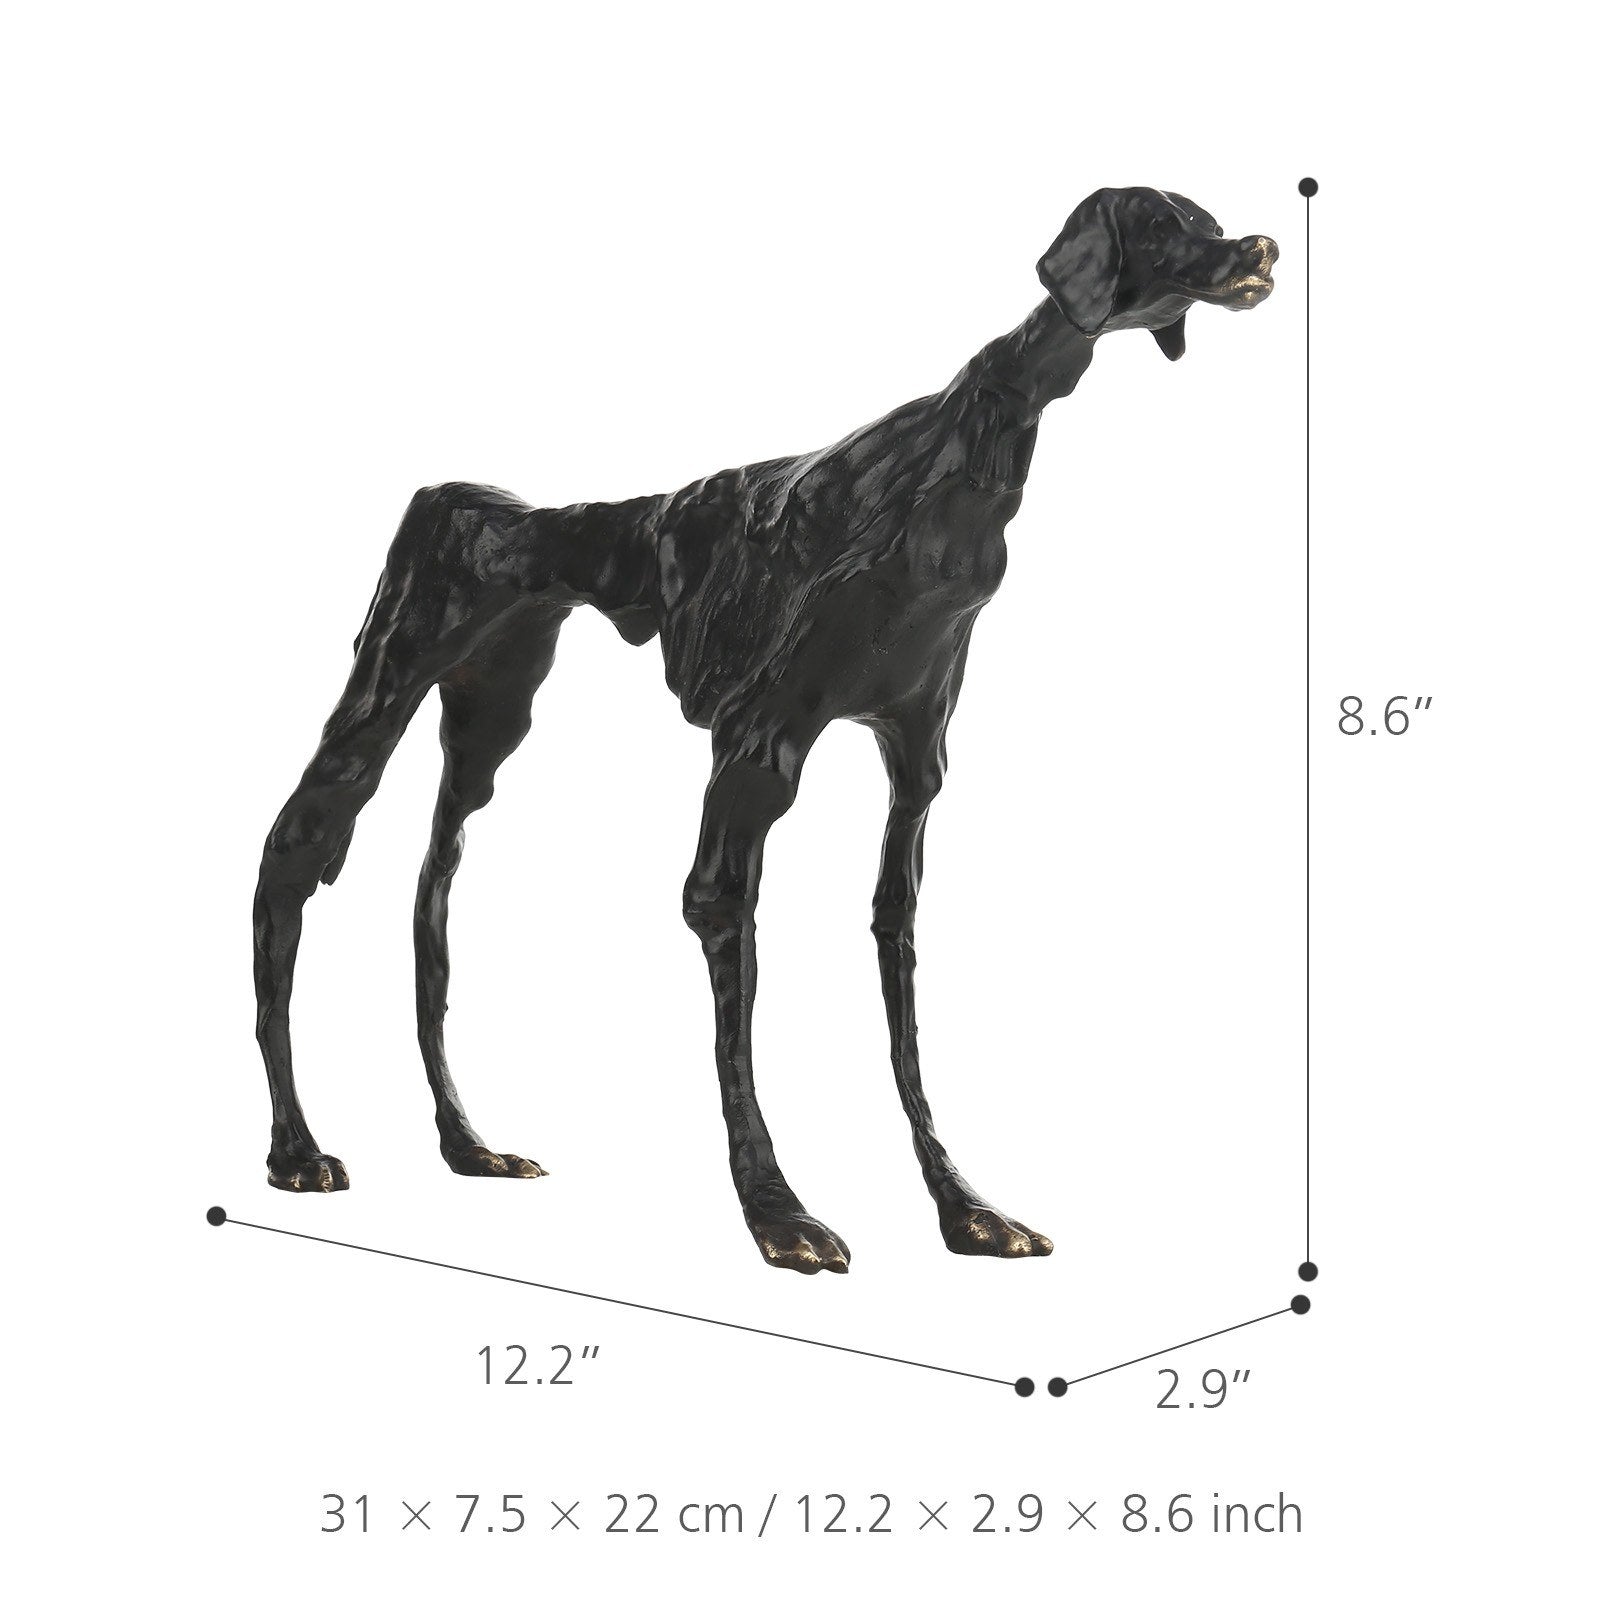 Dog sculpture by Alberto Giacometti: a shocking balance and tranquility